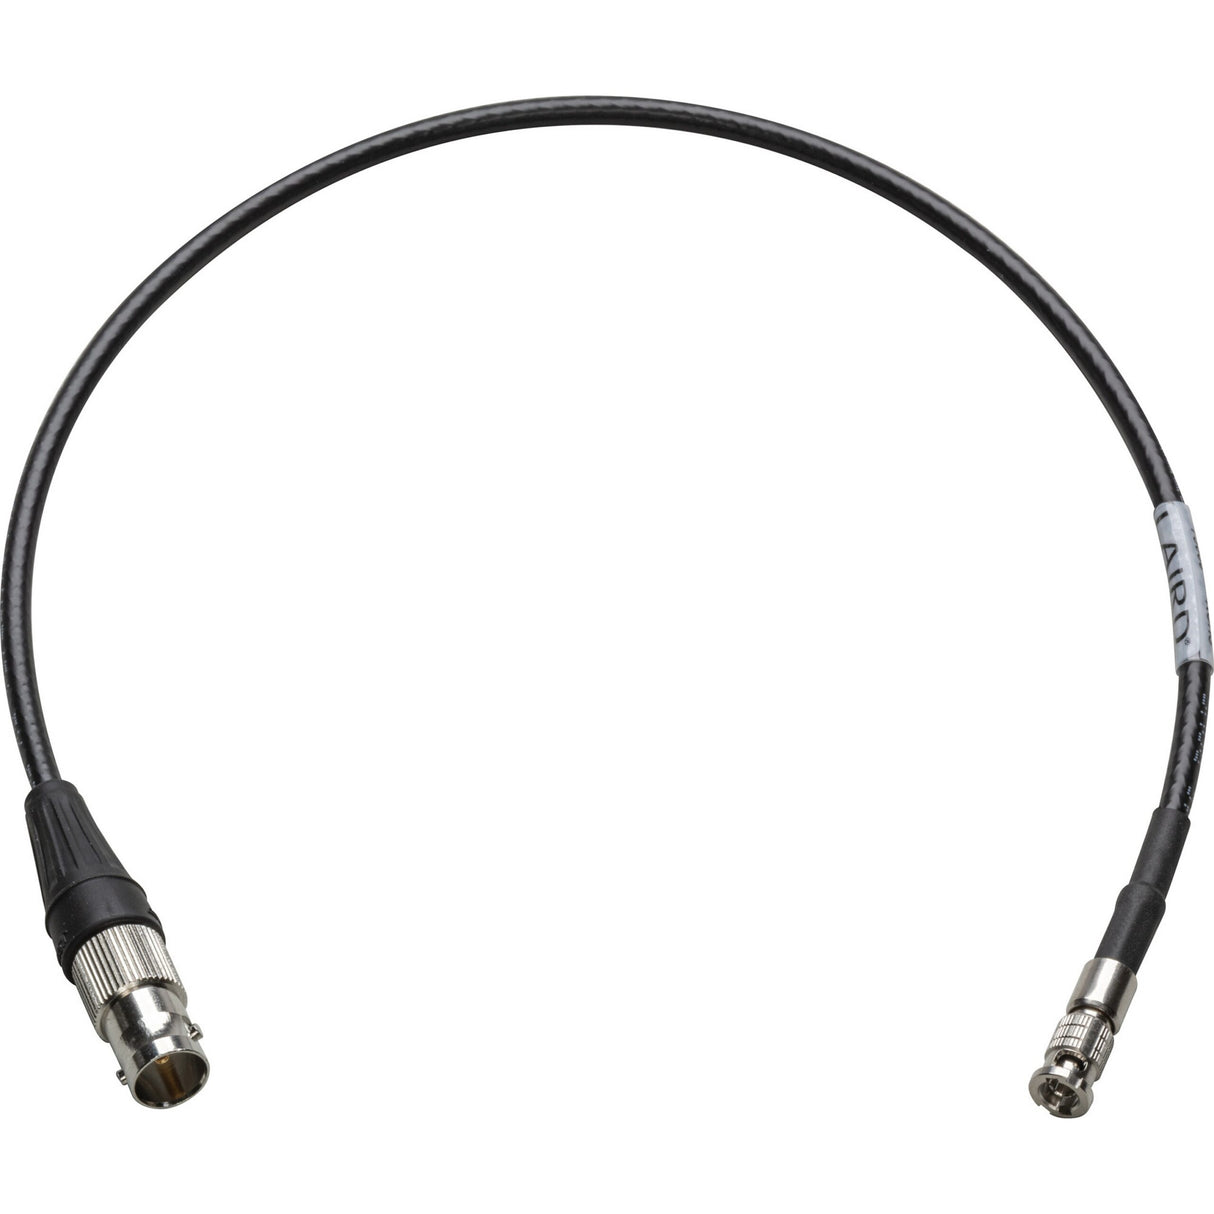 Laird HDBNC4855-BF6IN High Density HD-BNC Male to Standard BNC Female 12G HD-SDI Cable, 6-Inch